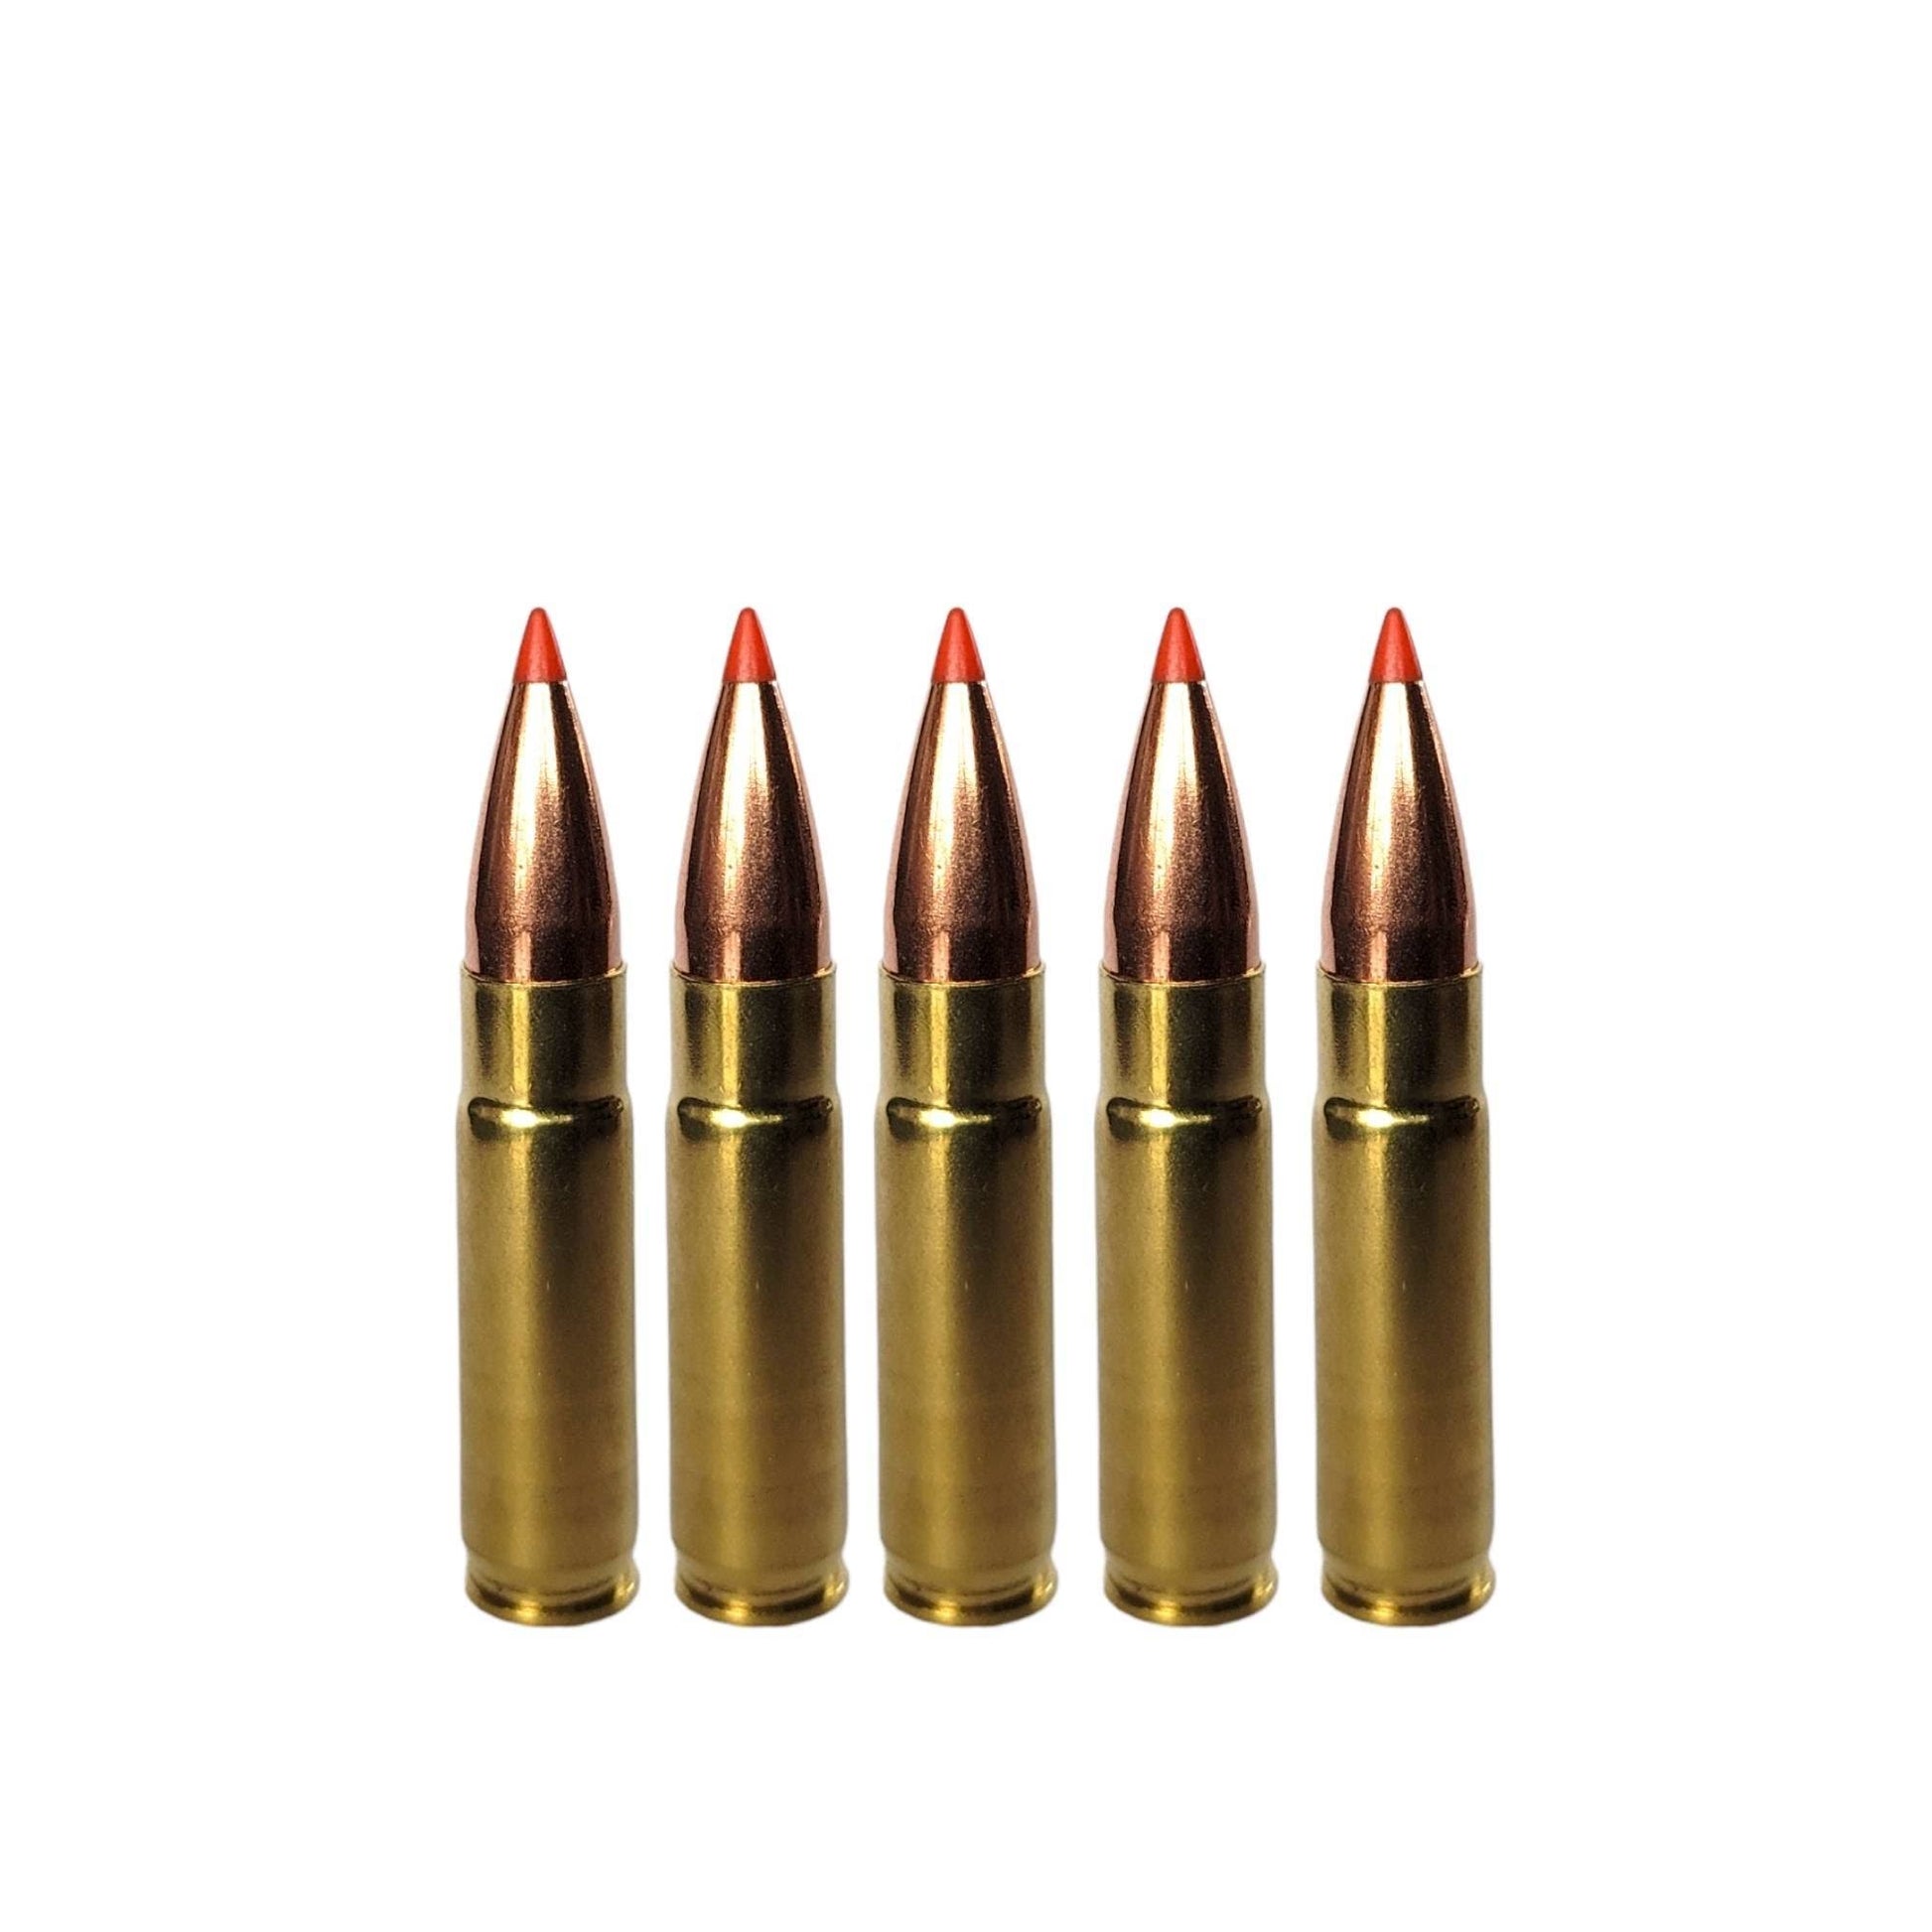 300-AAC-Blackout-ammo